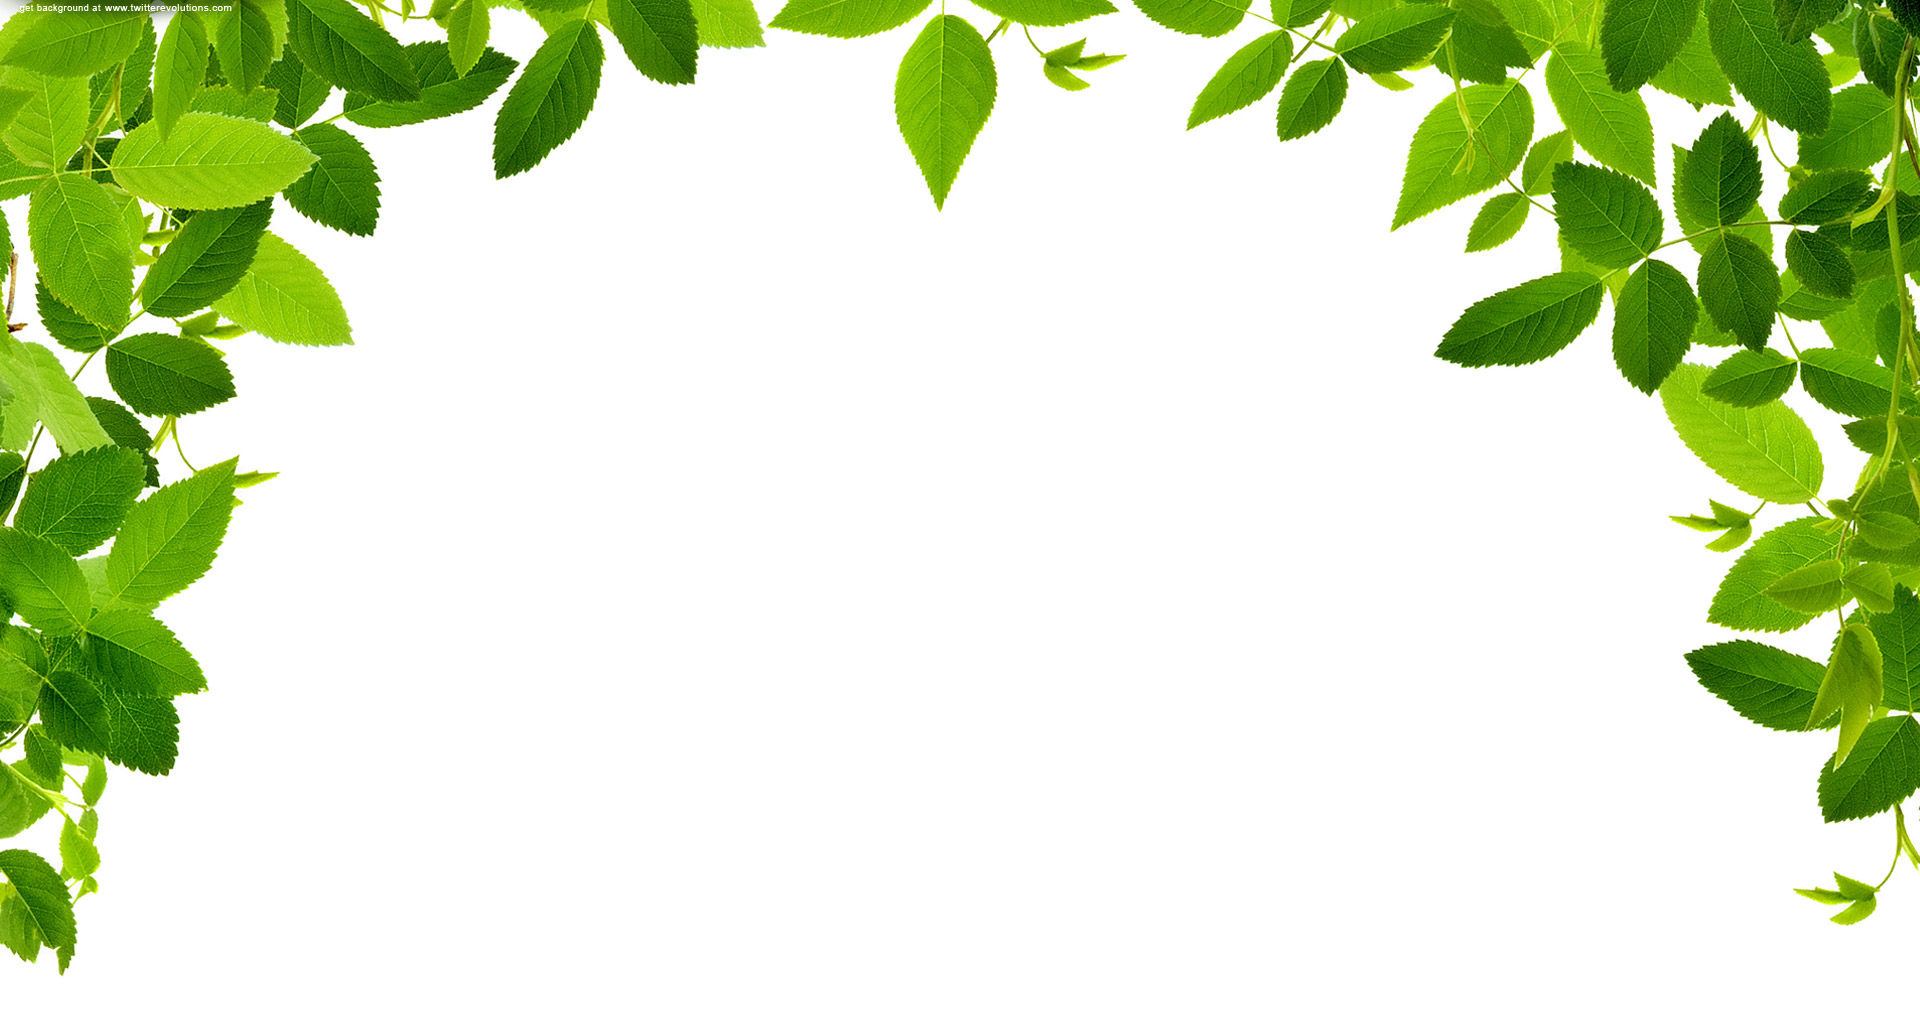 Leaves Real   Free Images At Clker Com   Vector Clip Art Online